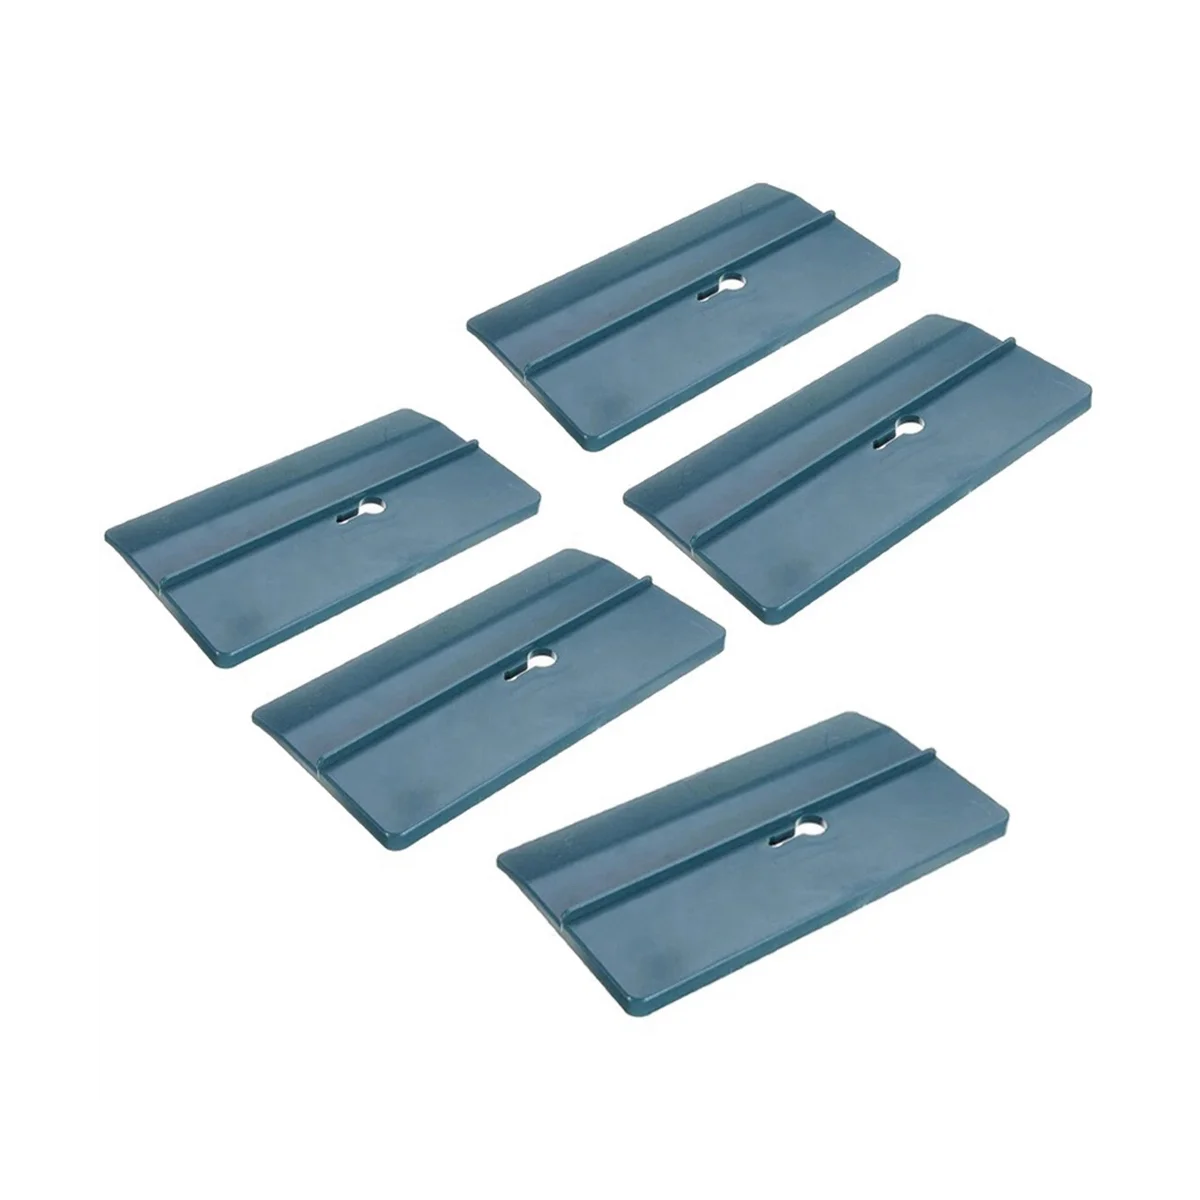 

Gypsum Board Ceiling Auxiliary Board Carpentry Room Ceiling Ceiling Fixer Labor-Saving Tray Tool 5-Piece Set